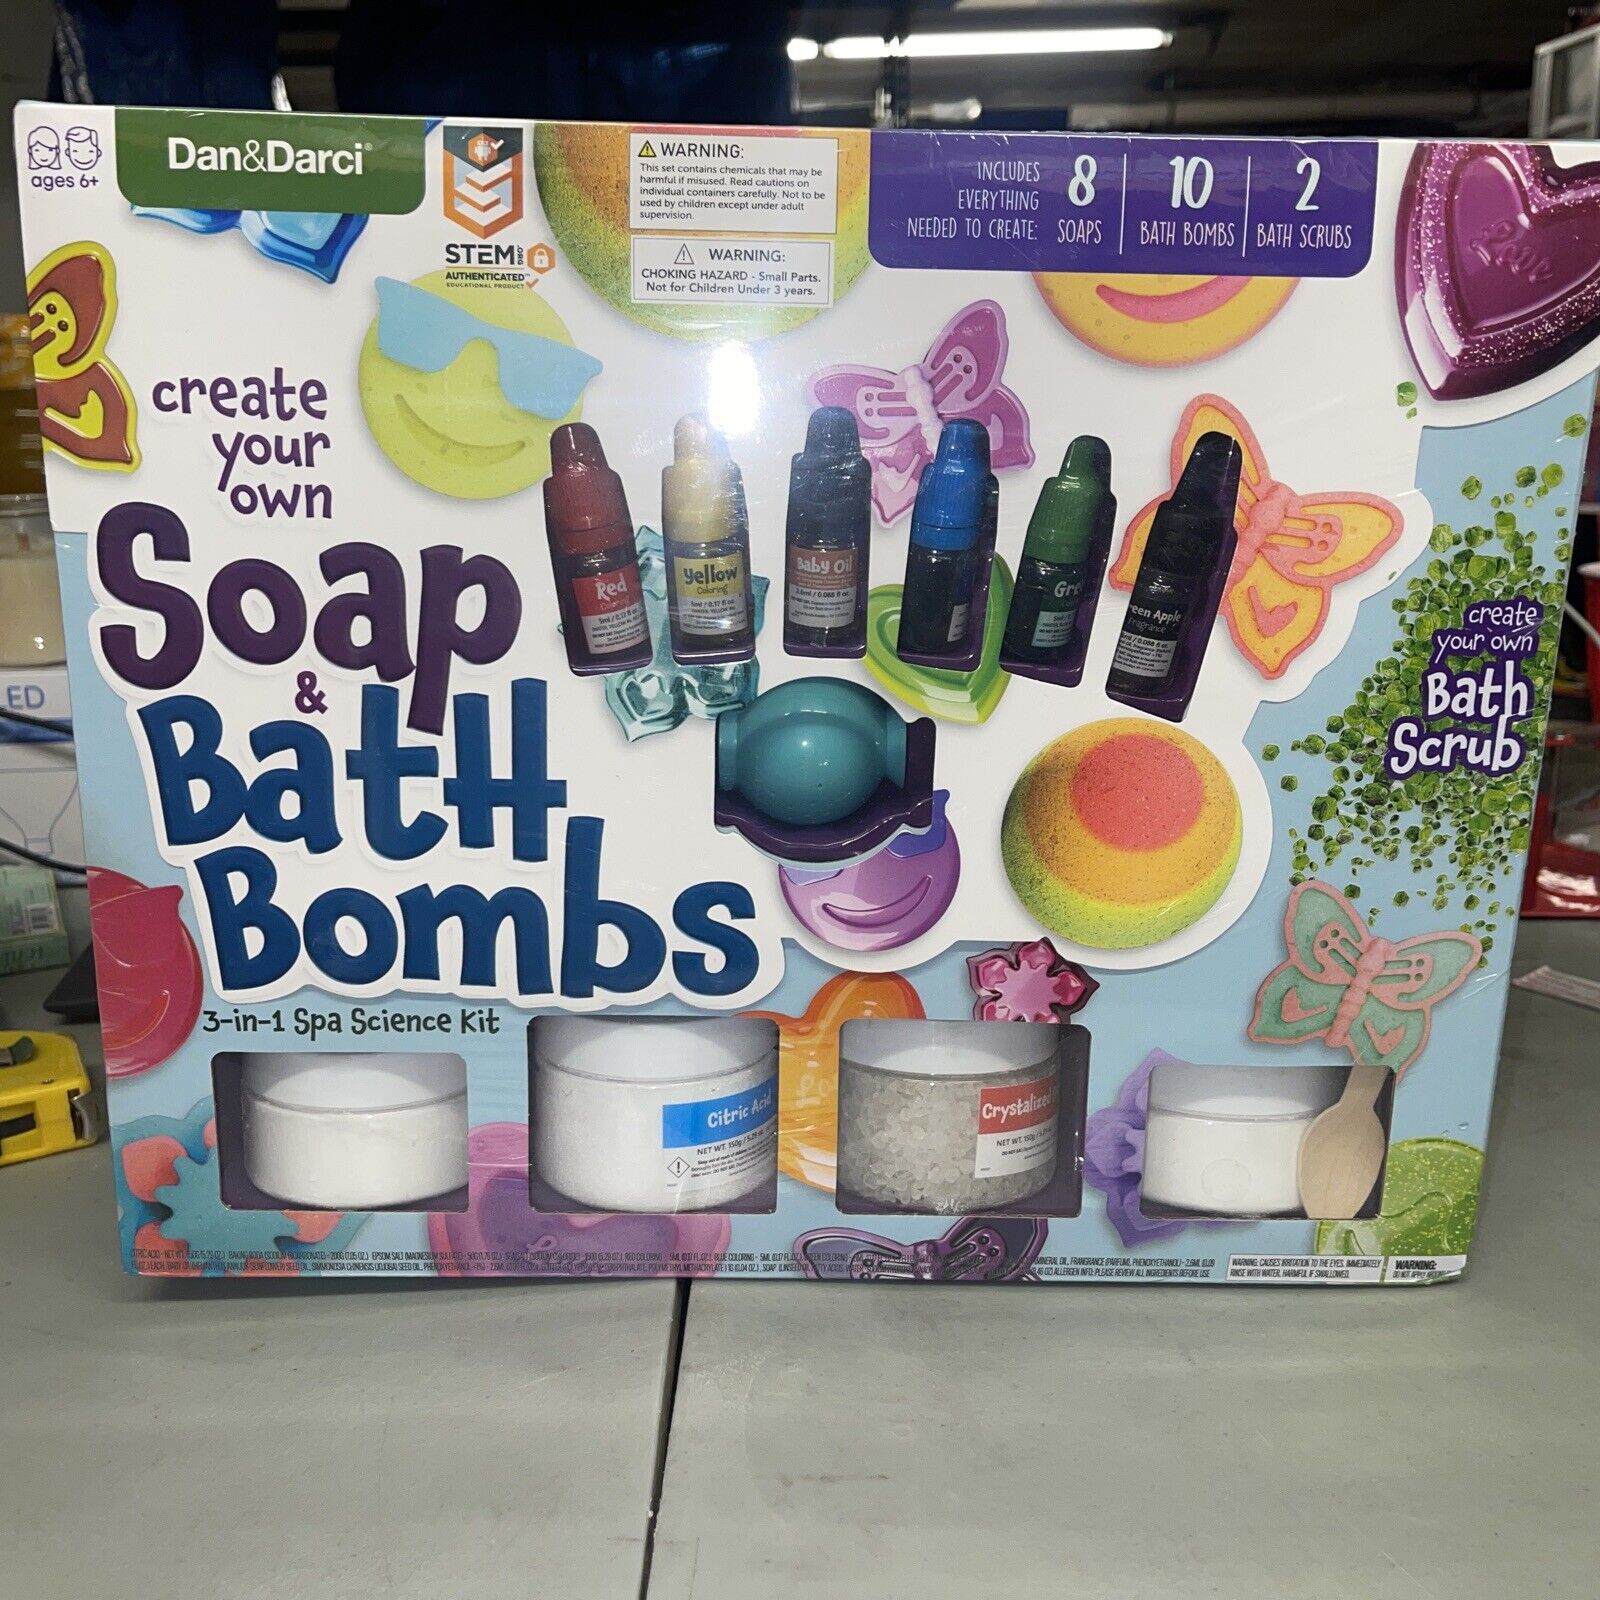 Soap & Bath Bomb Making Kit for Kids 3-in-1 Spa Science Kit Craft Gifts  NEW!